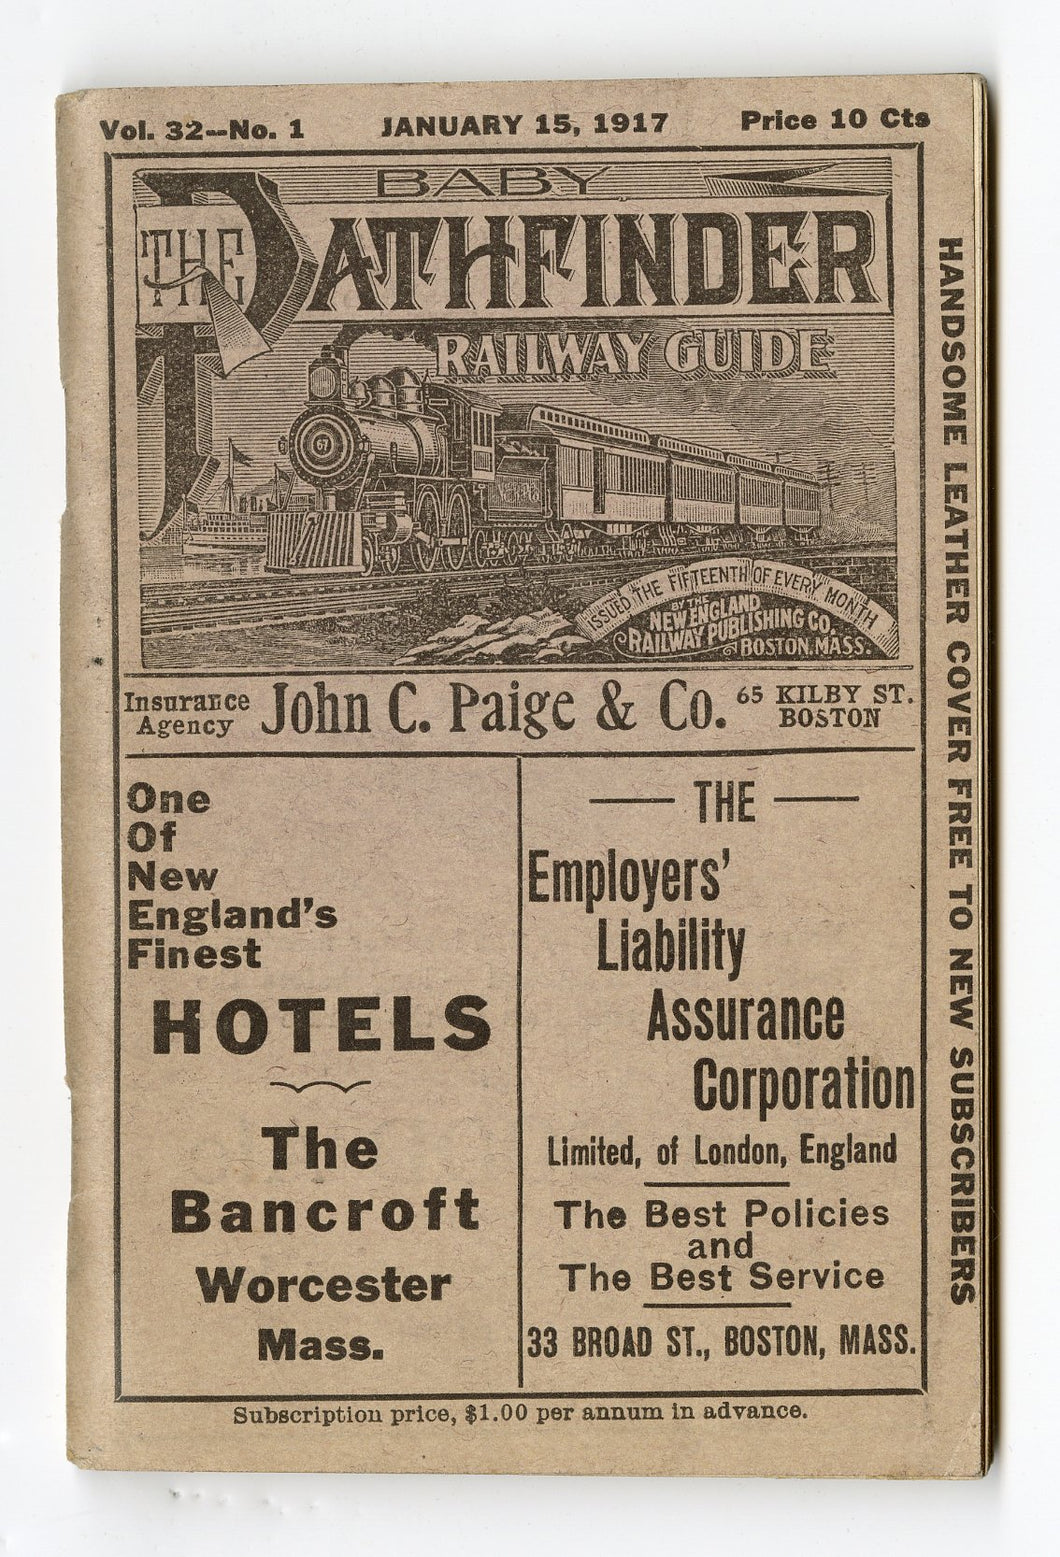 1917 BABY PATHFINDER RAILWAY GUIDE Booklet, Train Schedule Guide 